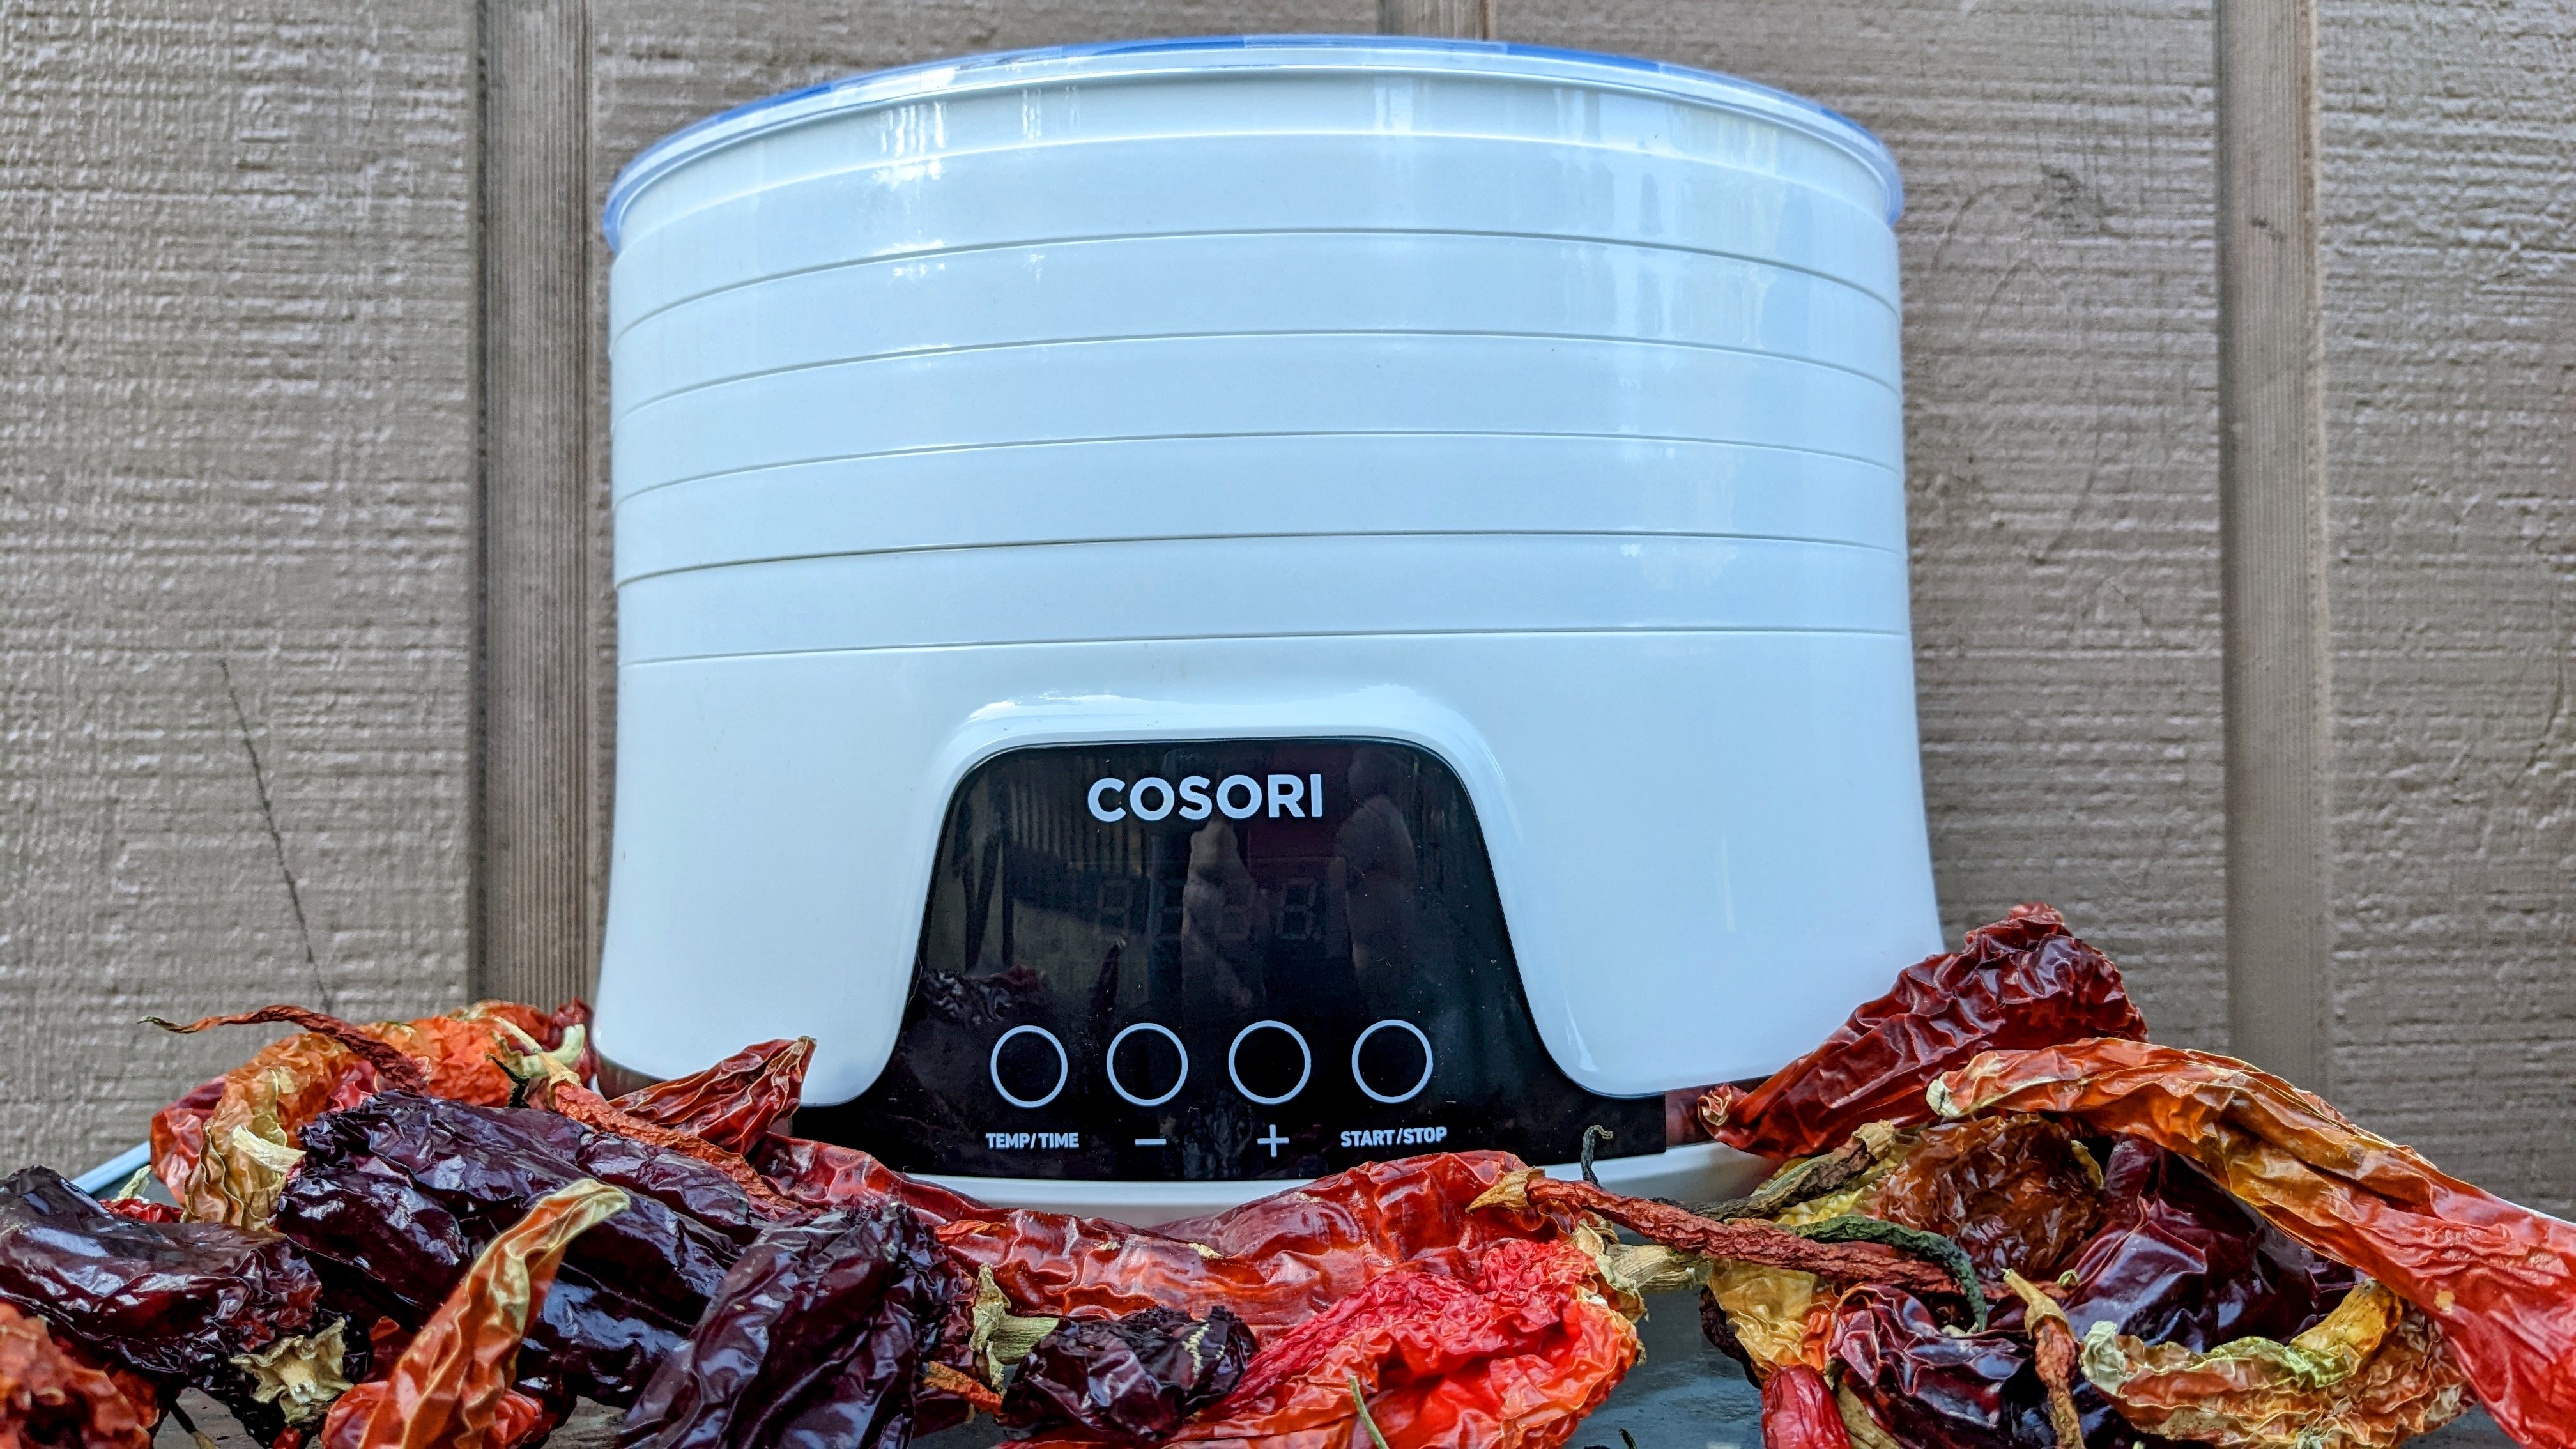 What We Bought: The Cosori 0165 Dehydrator Mummifies Meat for $70